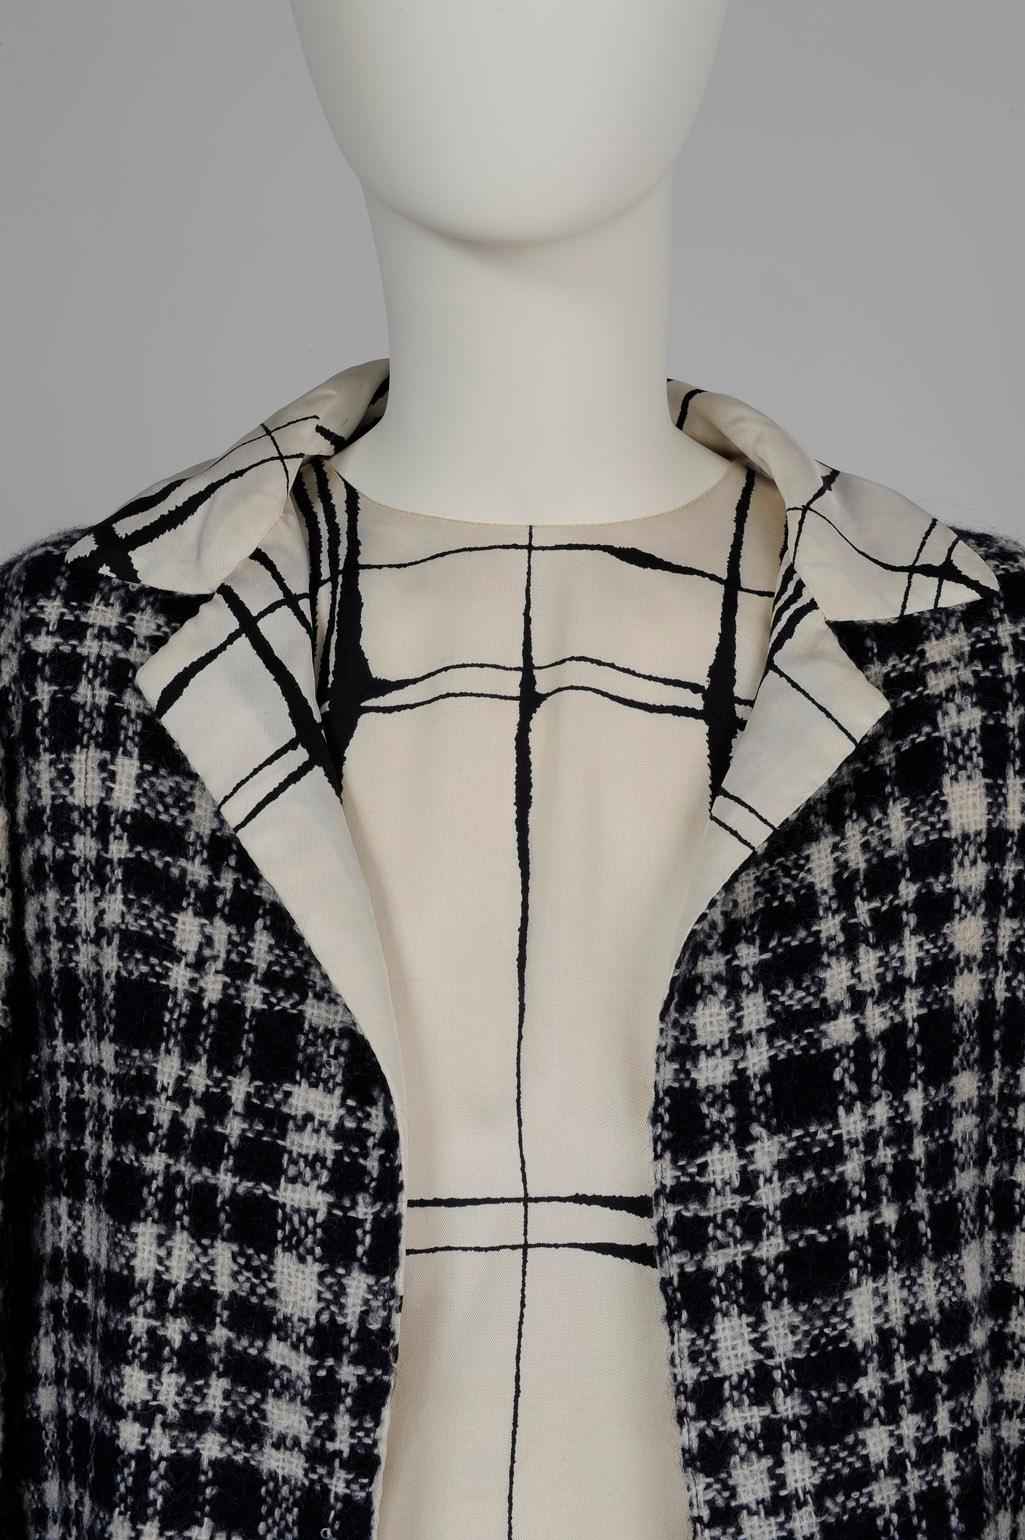 Women's Documented Chanel by Coco Chanel Haute Couture Suit Jacket, Spring-Summer 1964 For Sale